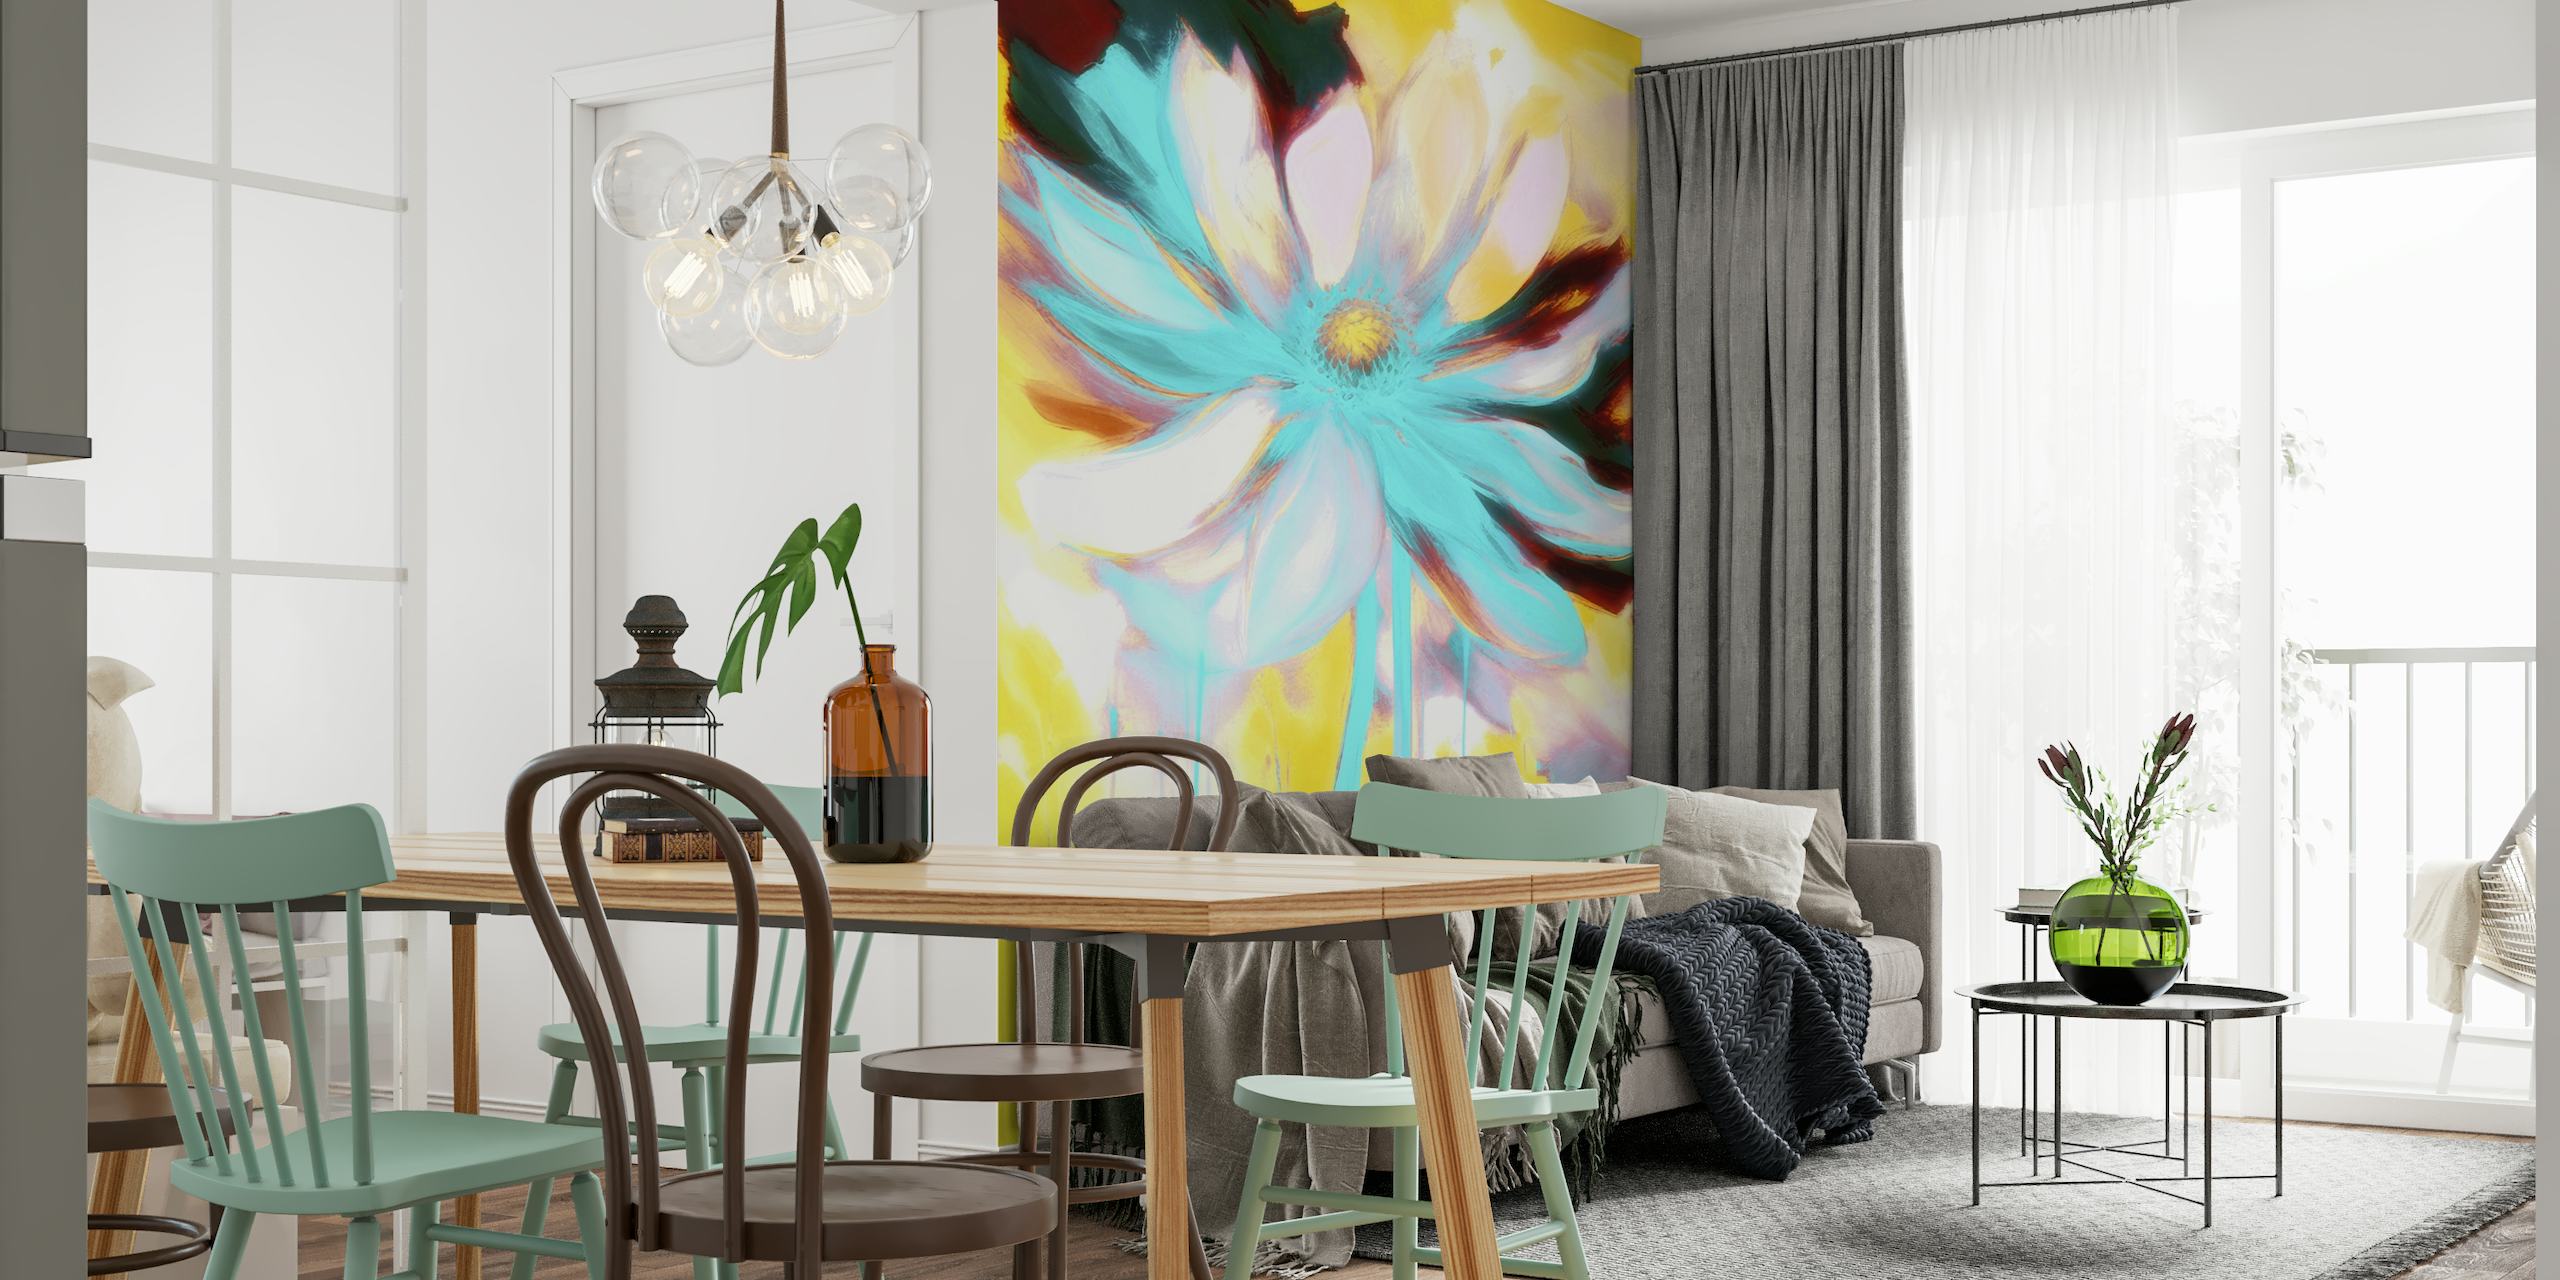 Stylized graffiti flower wall mural with vibrant colors